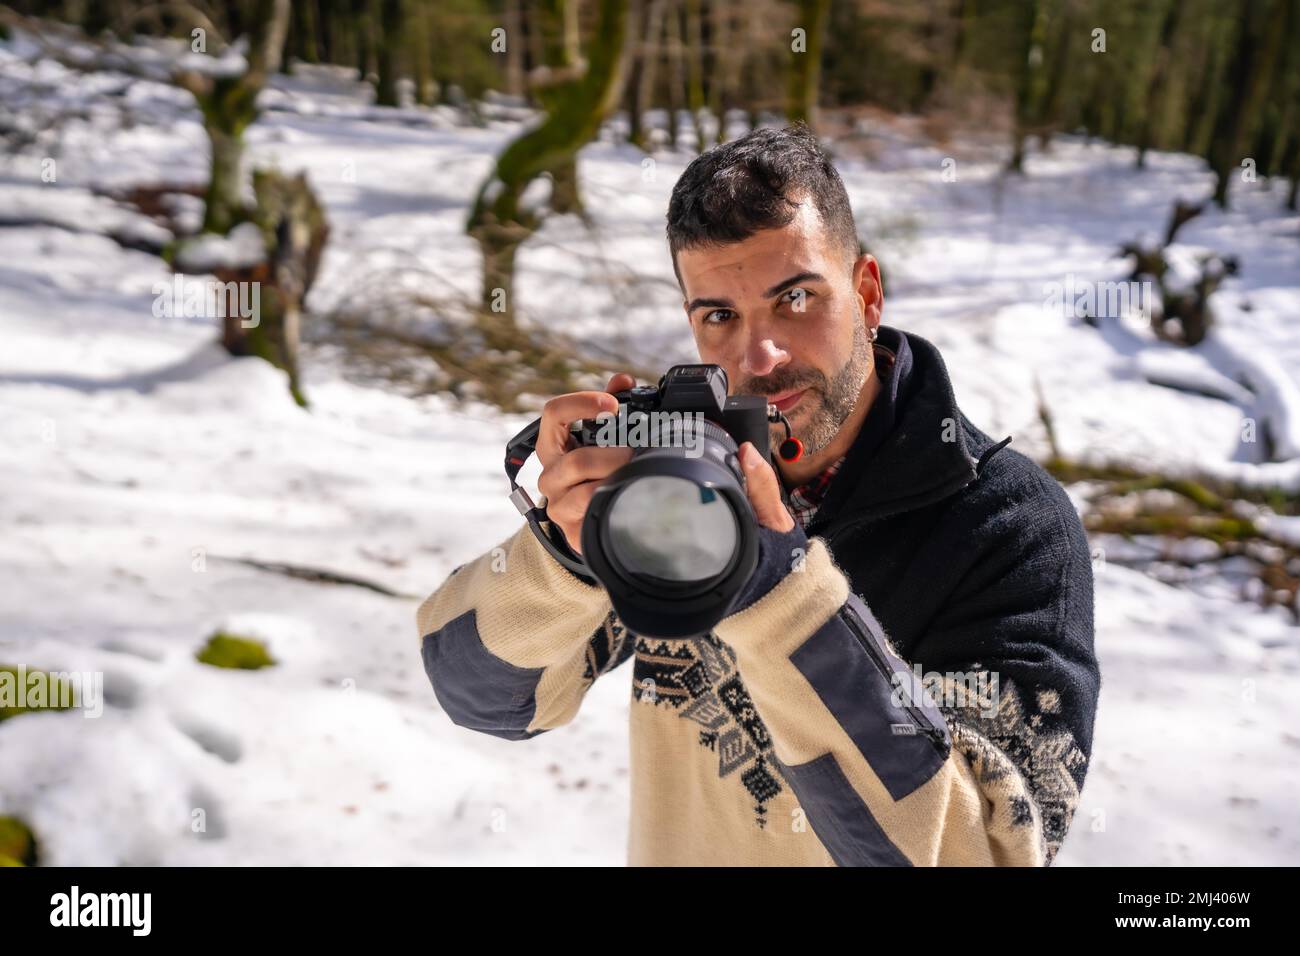 Photographer man taking a photo in the snow, enjoying winter photography in a snowy forest Stock Photo